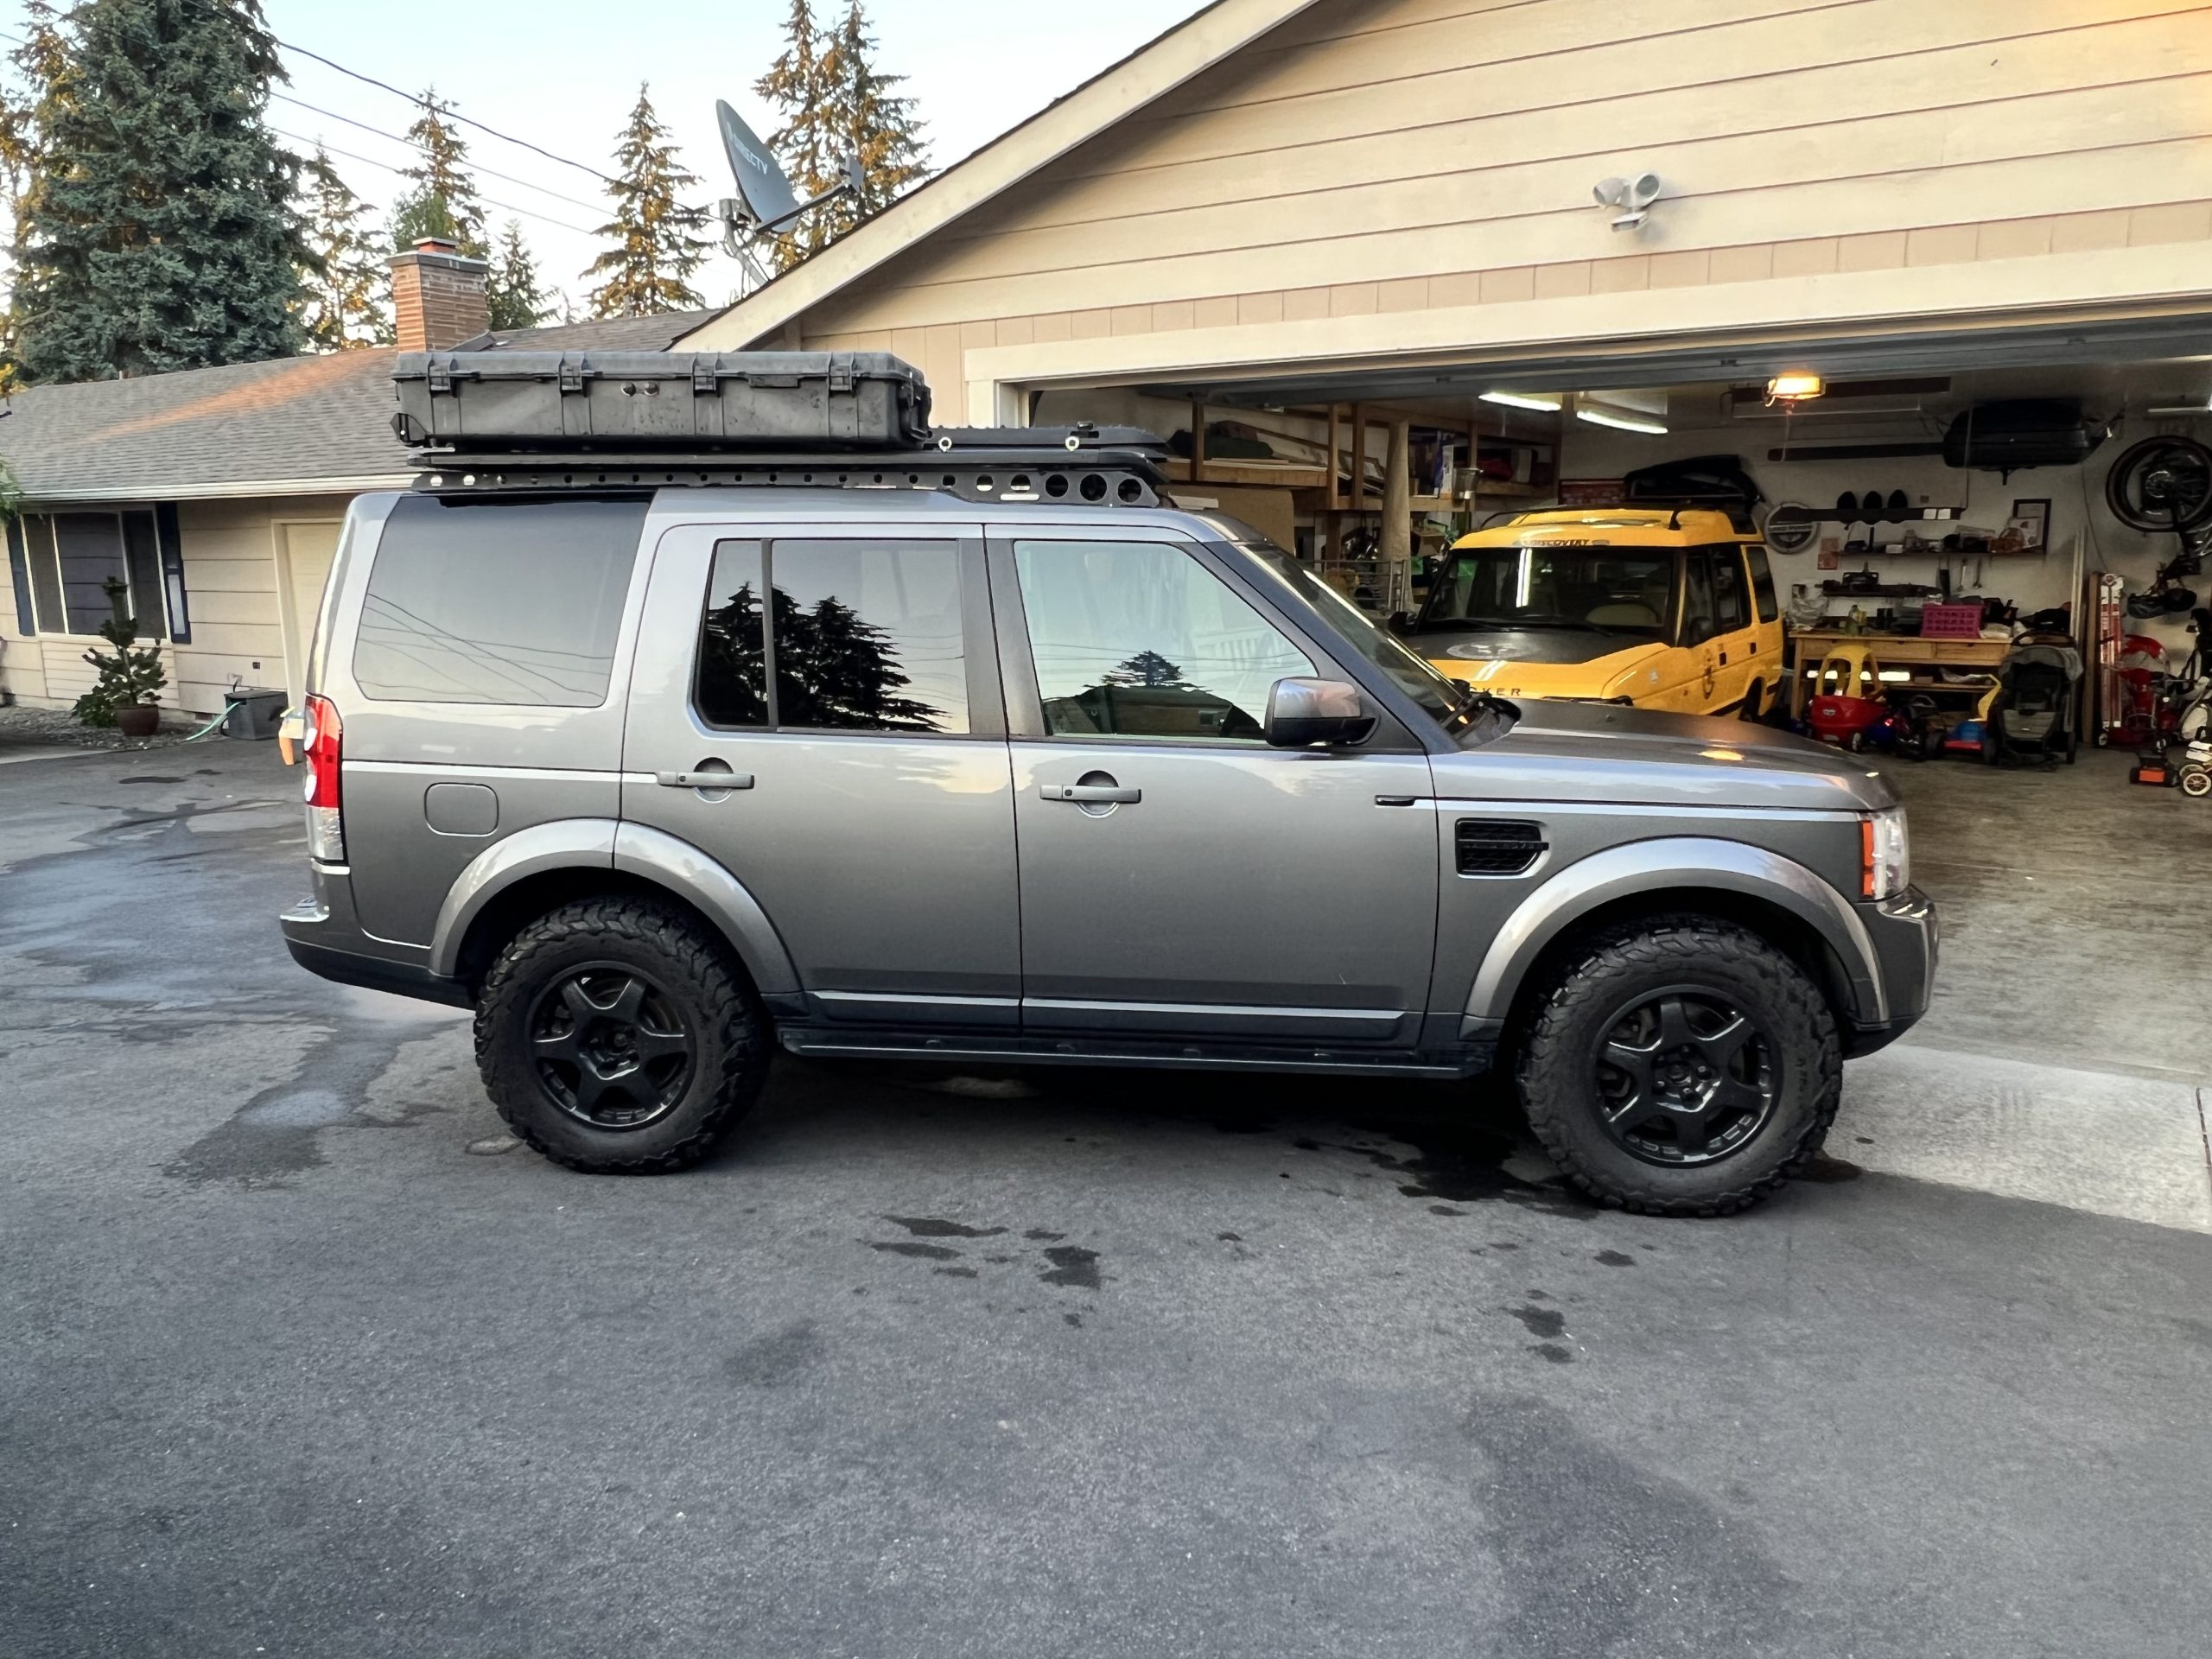 Overland Classifieds :: 2010 Land Rover LR4 - Expedition Portal